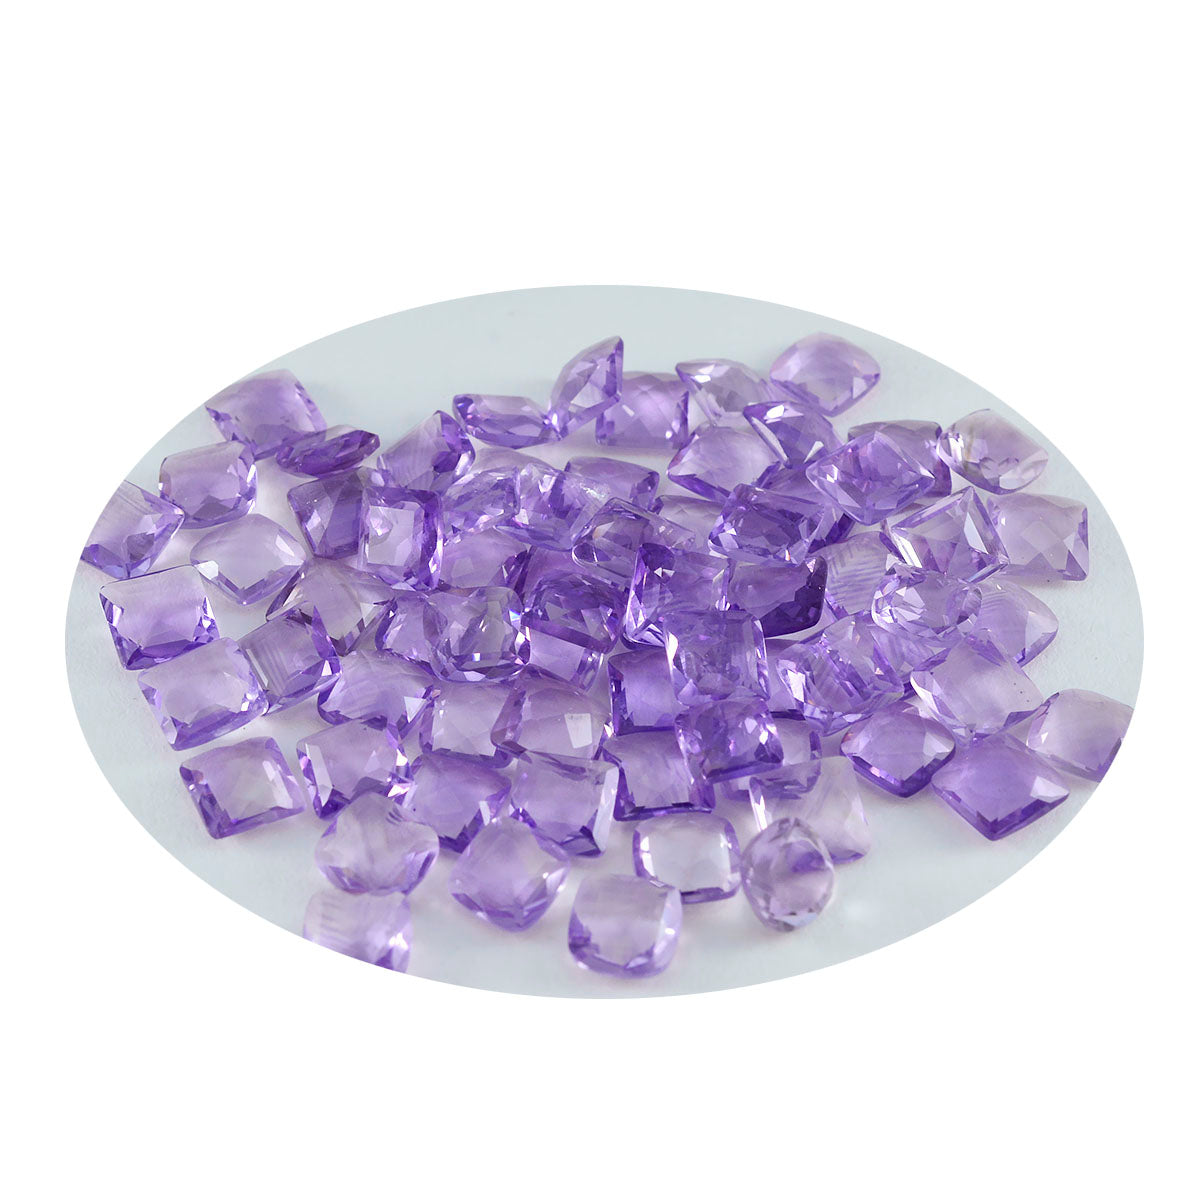 Riyogems 1PC Natural Purple Amethyst Faceted 5x5 mm Square Shape A1 Quality Loose Stone